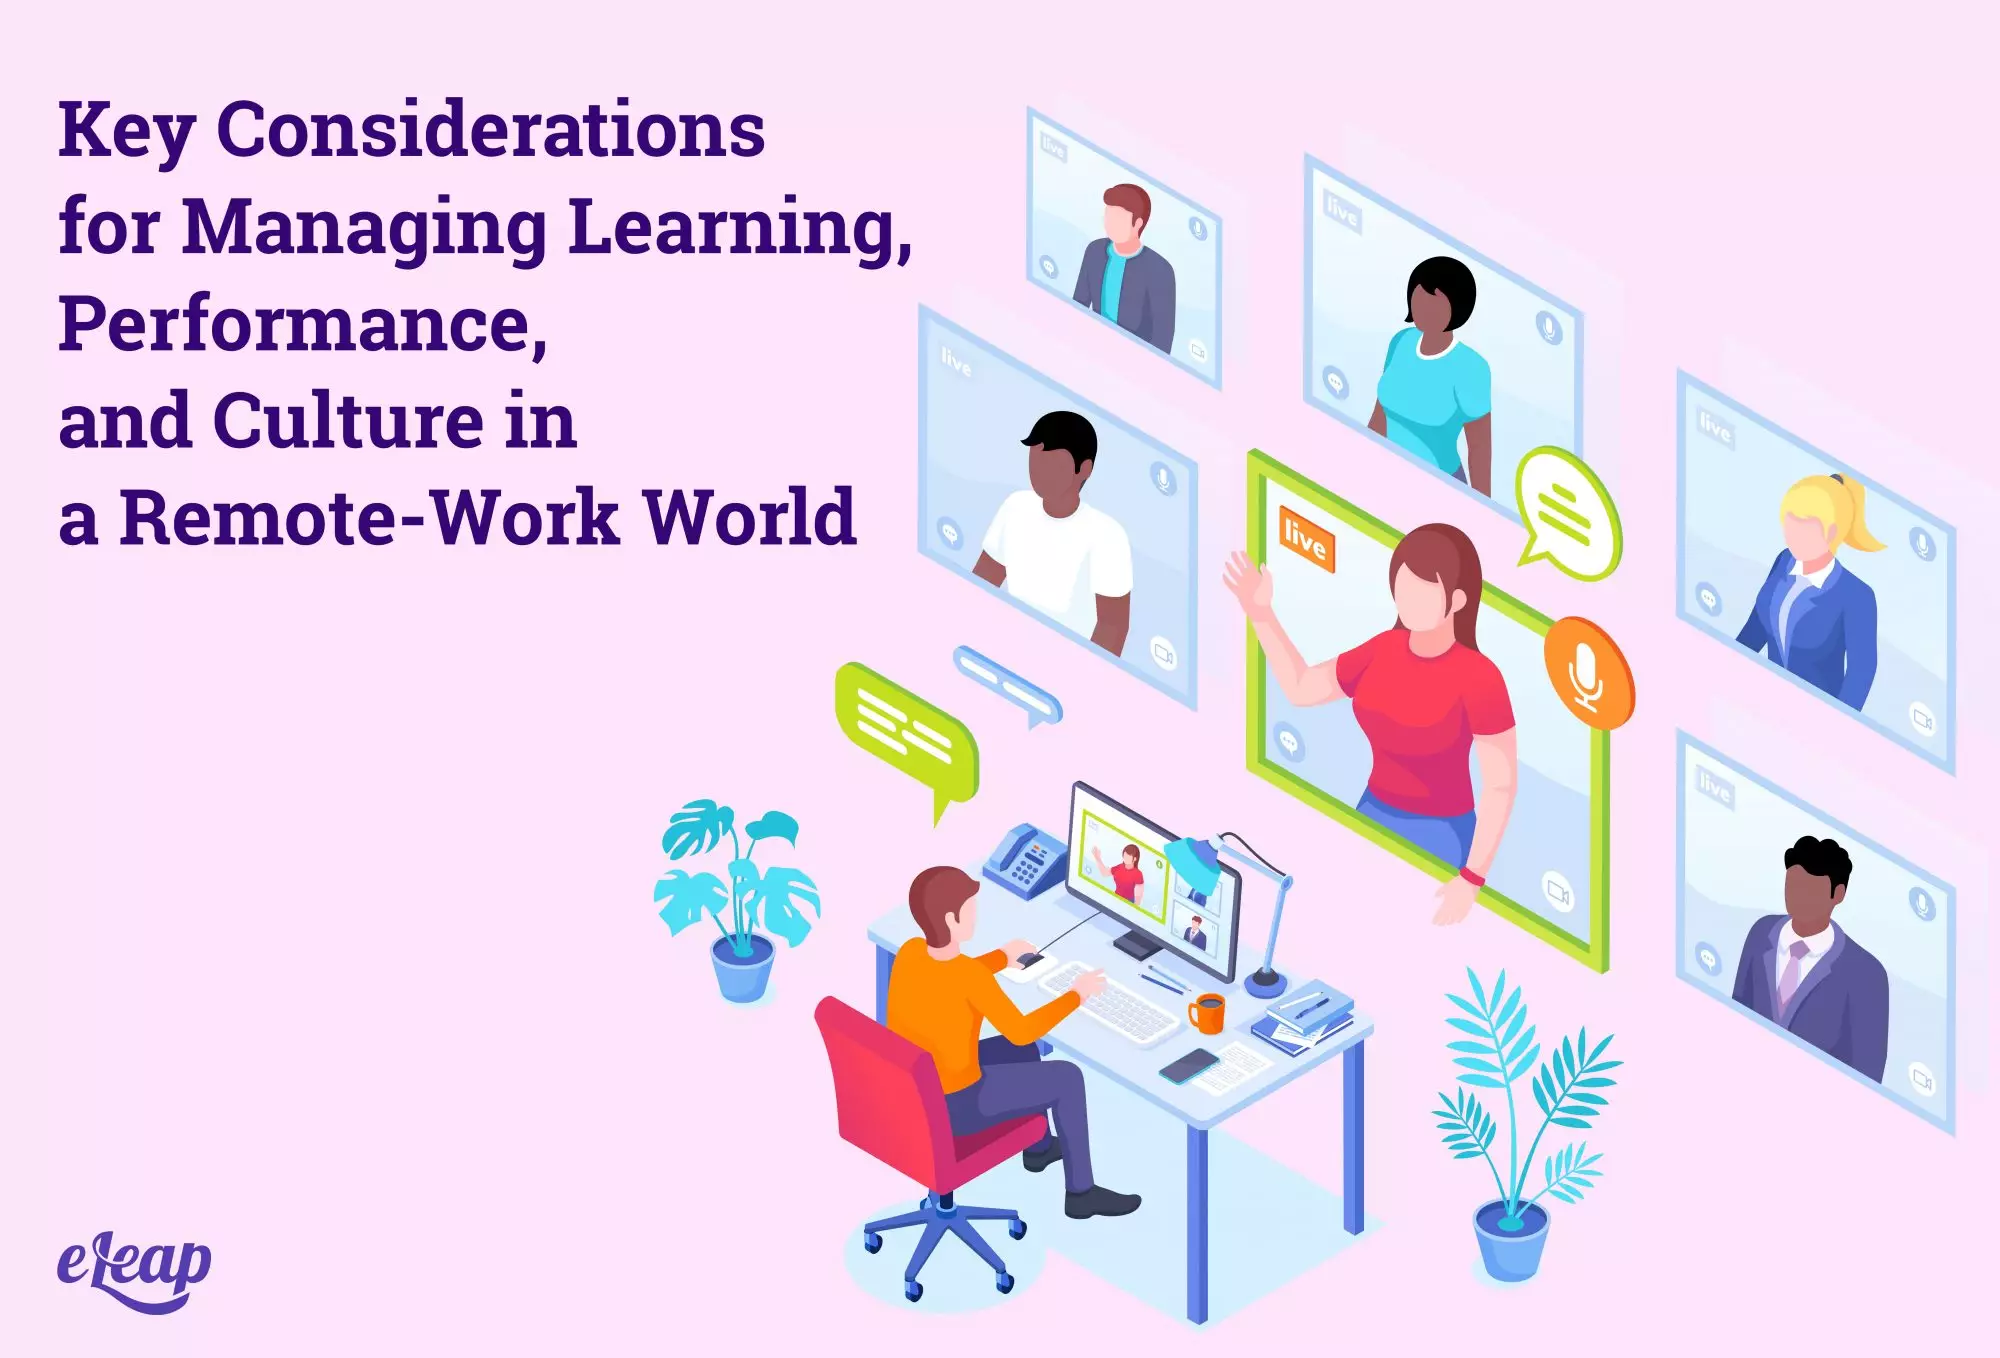 Key Considerations for Managing Learning, Performance, and Culture in a Remote-Work World